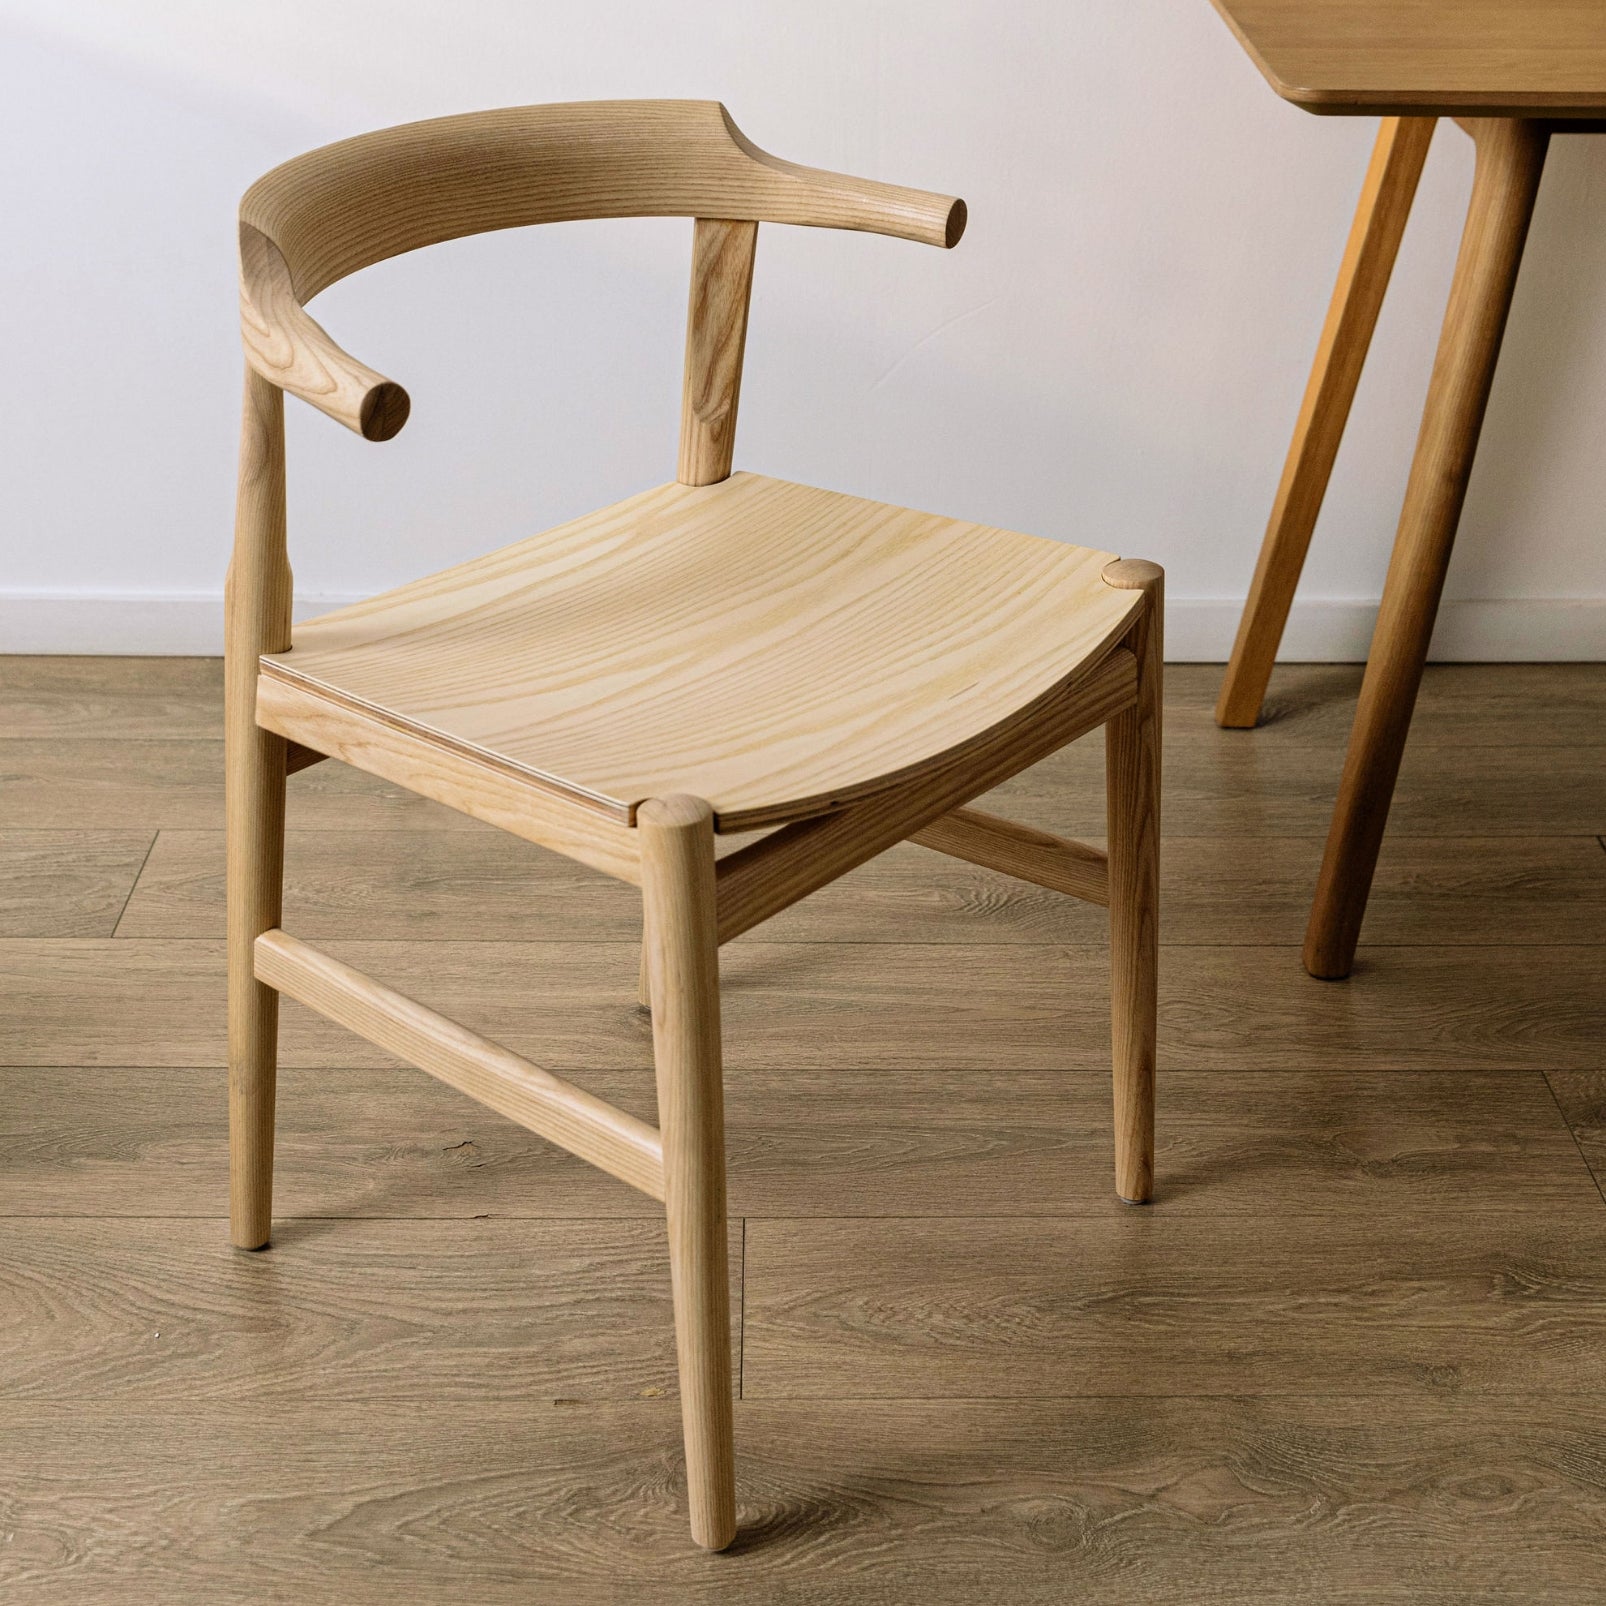 Tuck In Dining Chair, White Ash, Wood Seat - Image 7